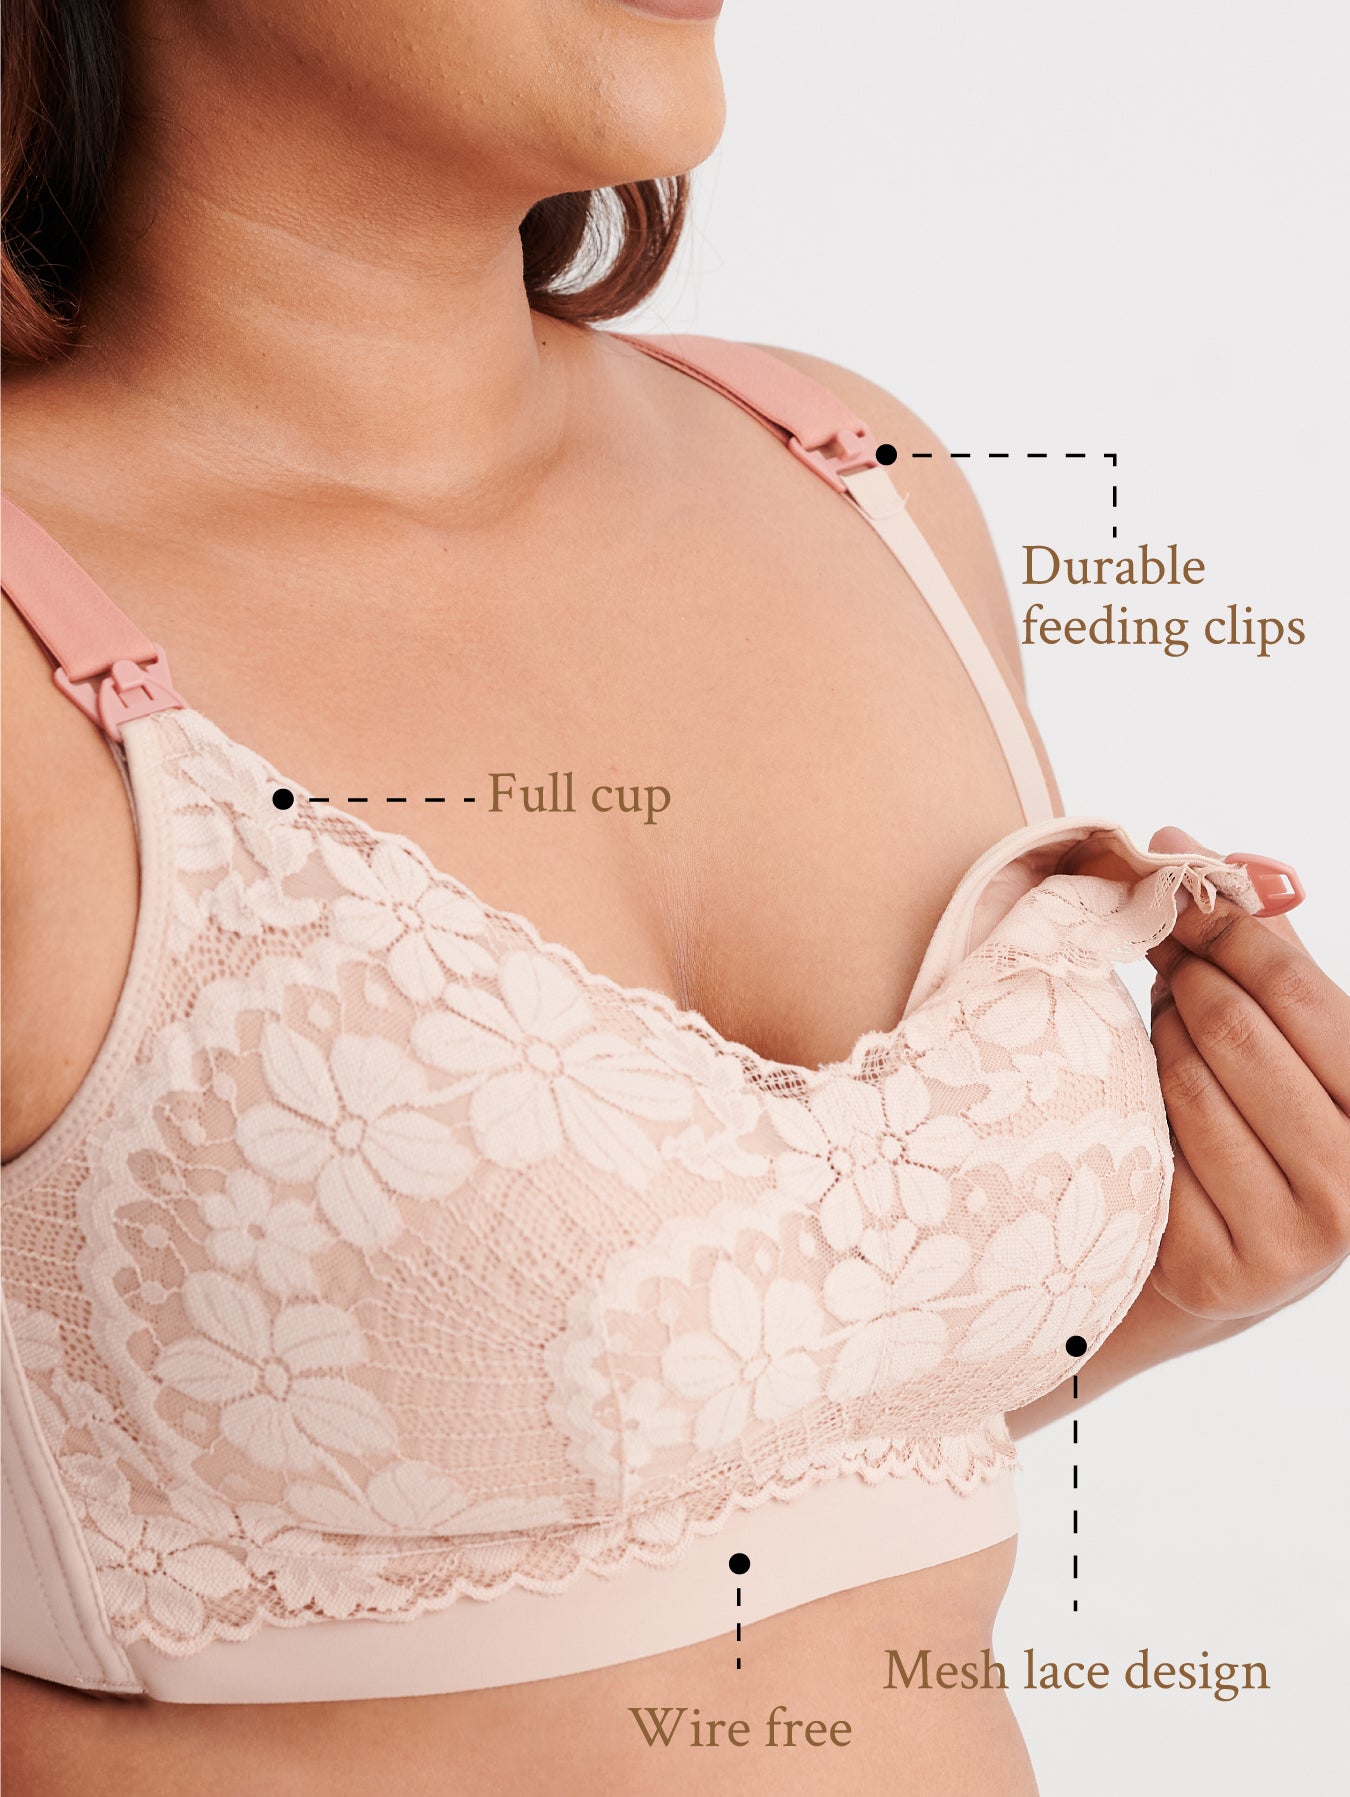 Nursing bra with comfortable fit